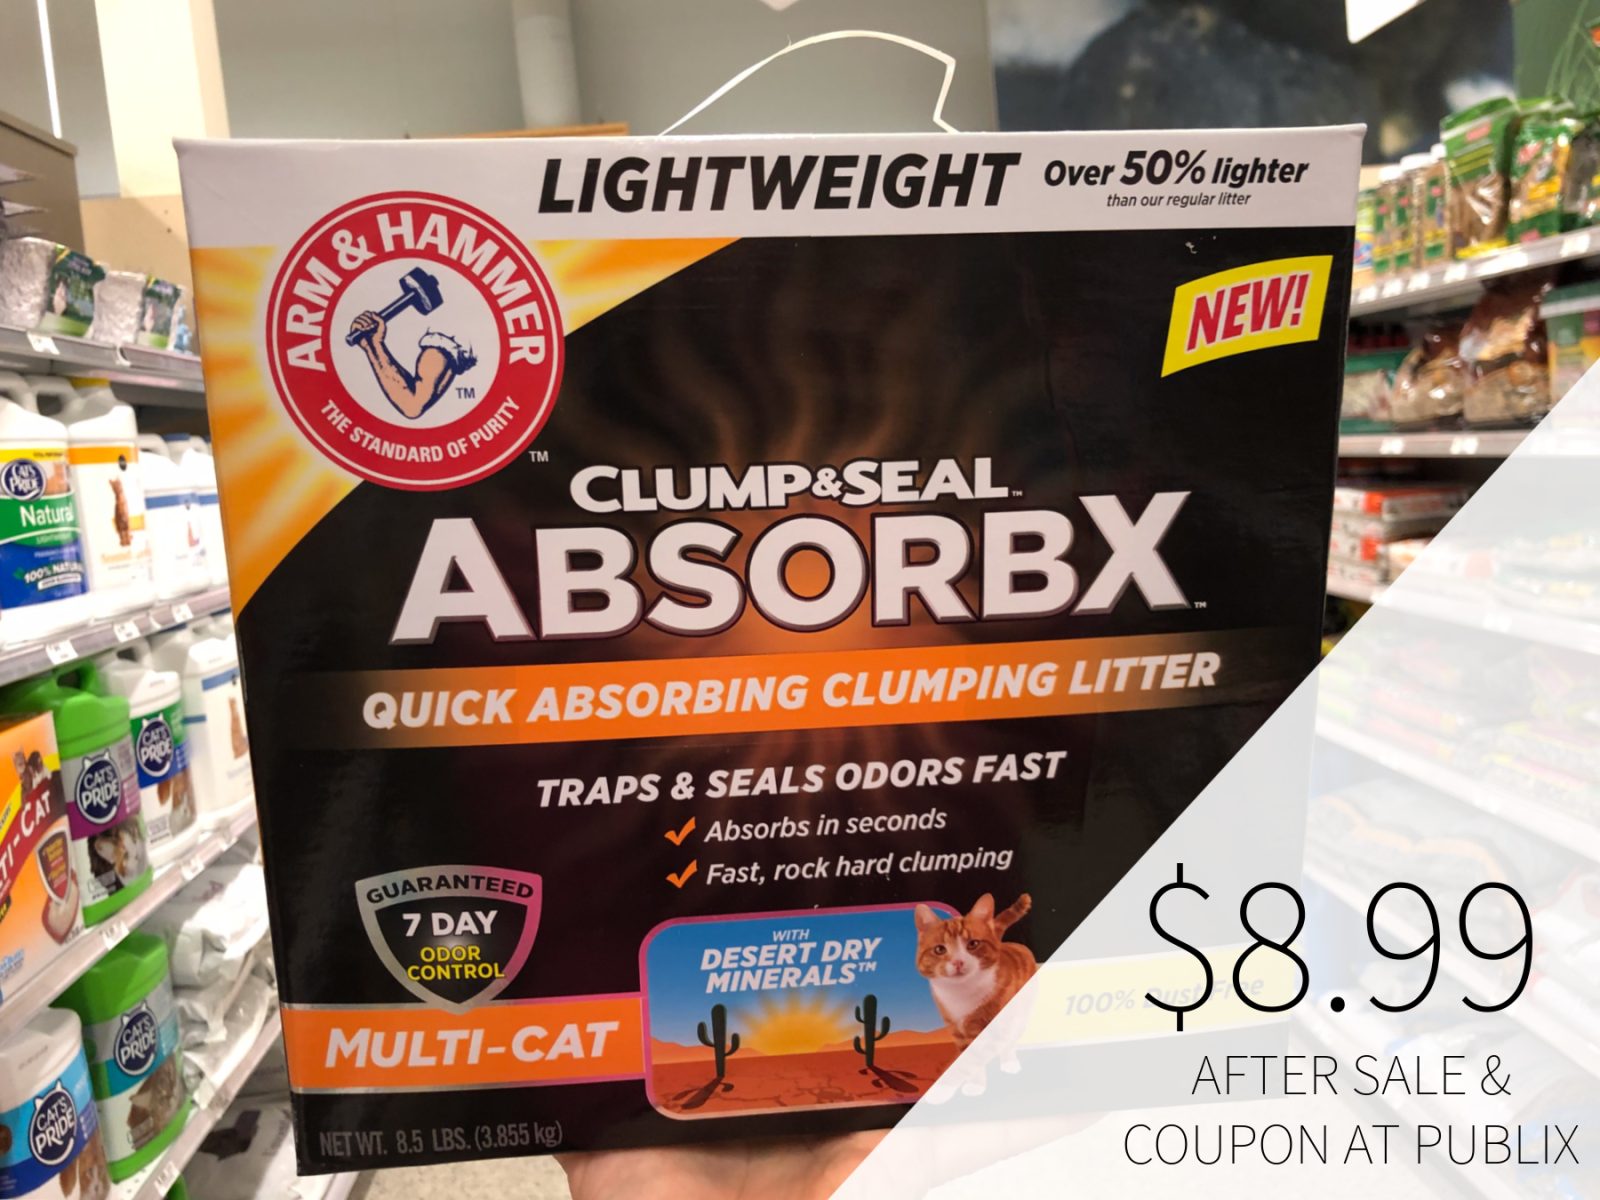 Try New ARM & HAMMER™ AbsorbX Clumping Litter – Save Now At Publix